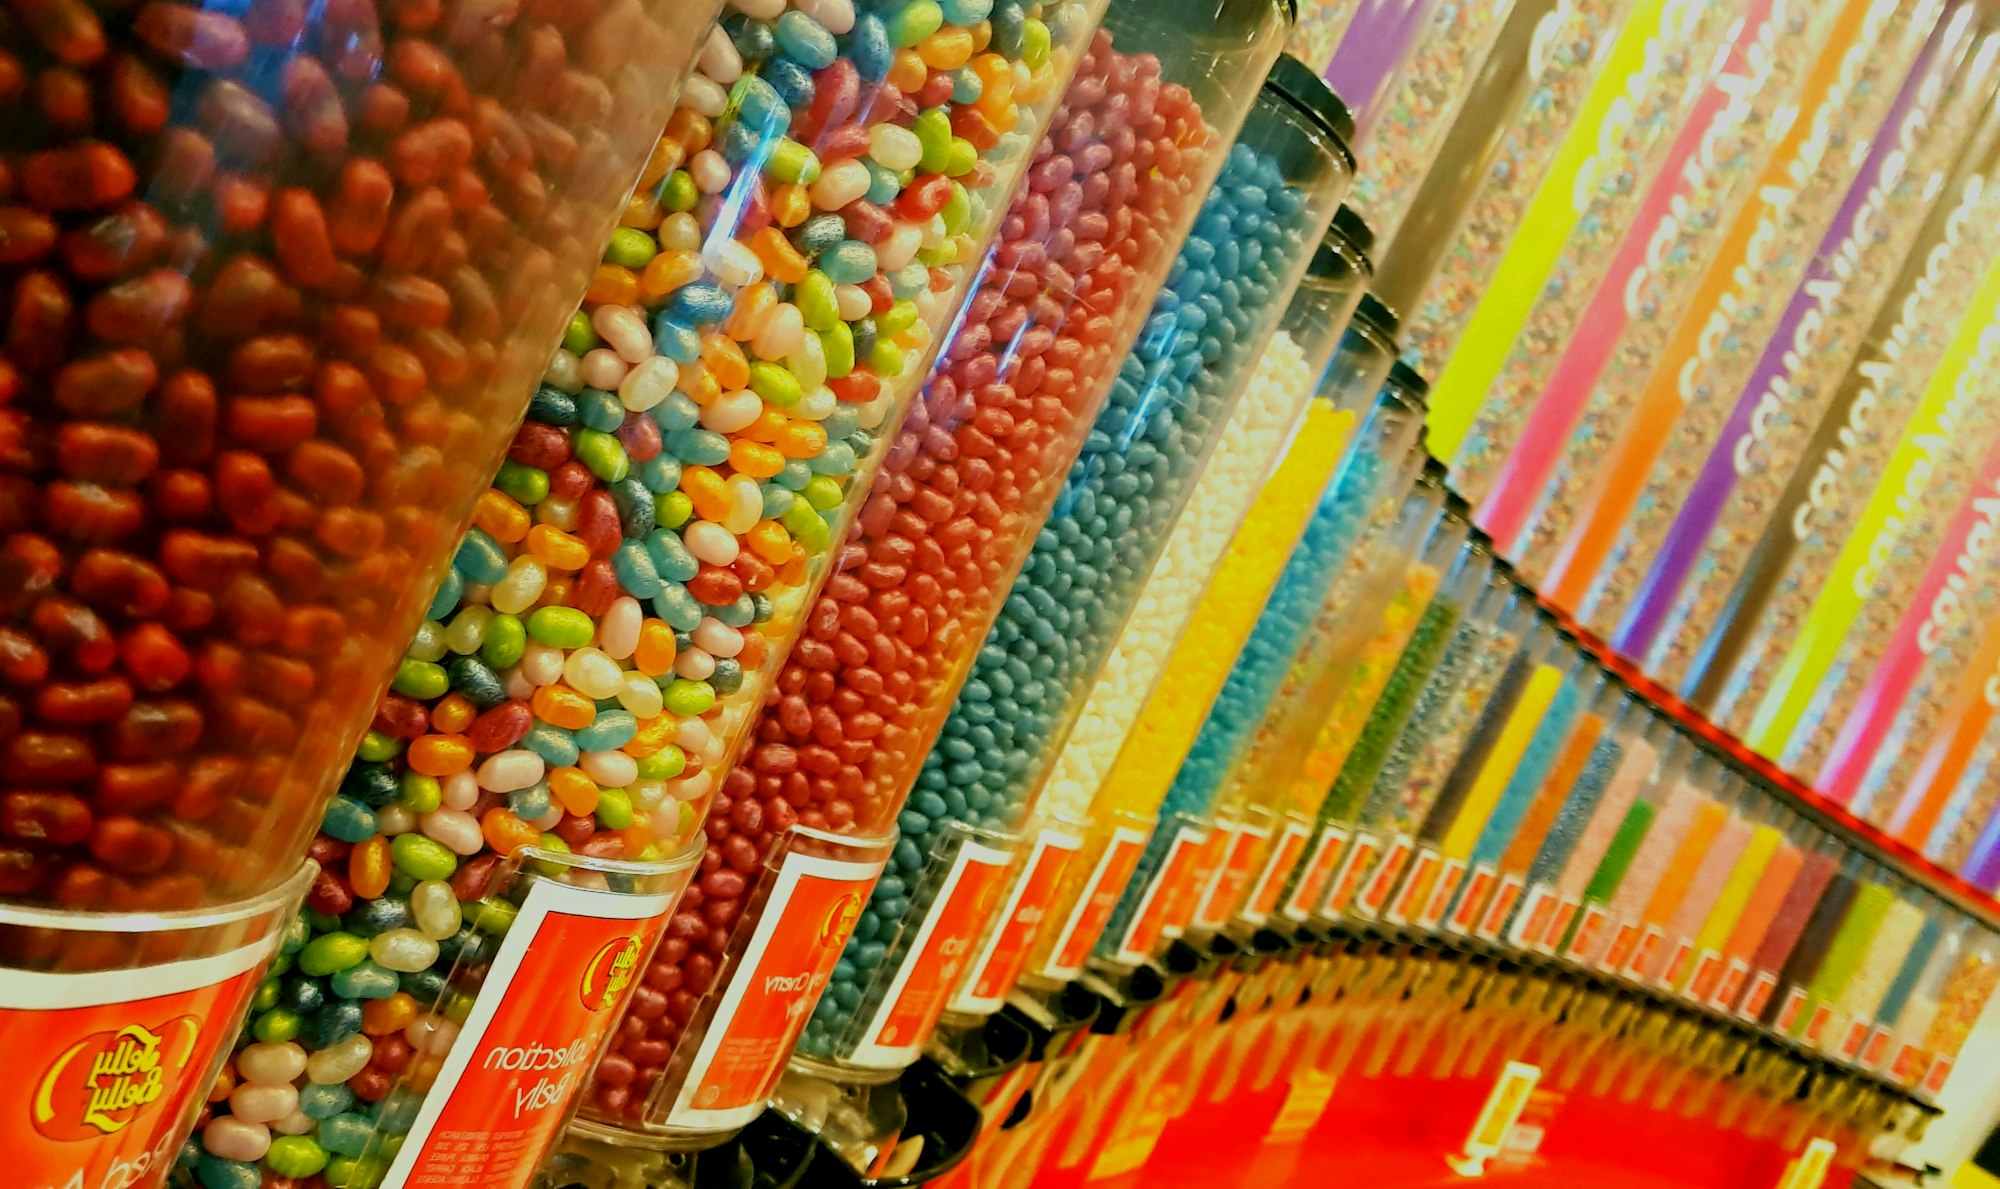 Rows of candy dispensers at a candy store.